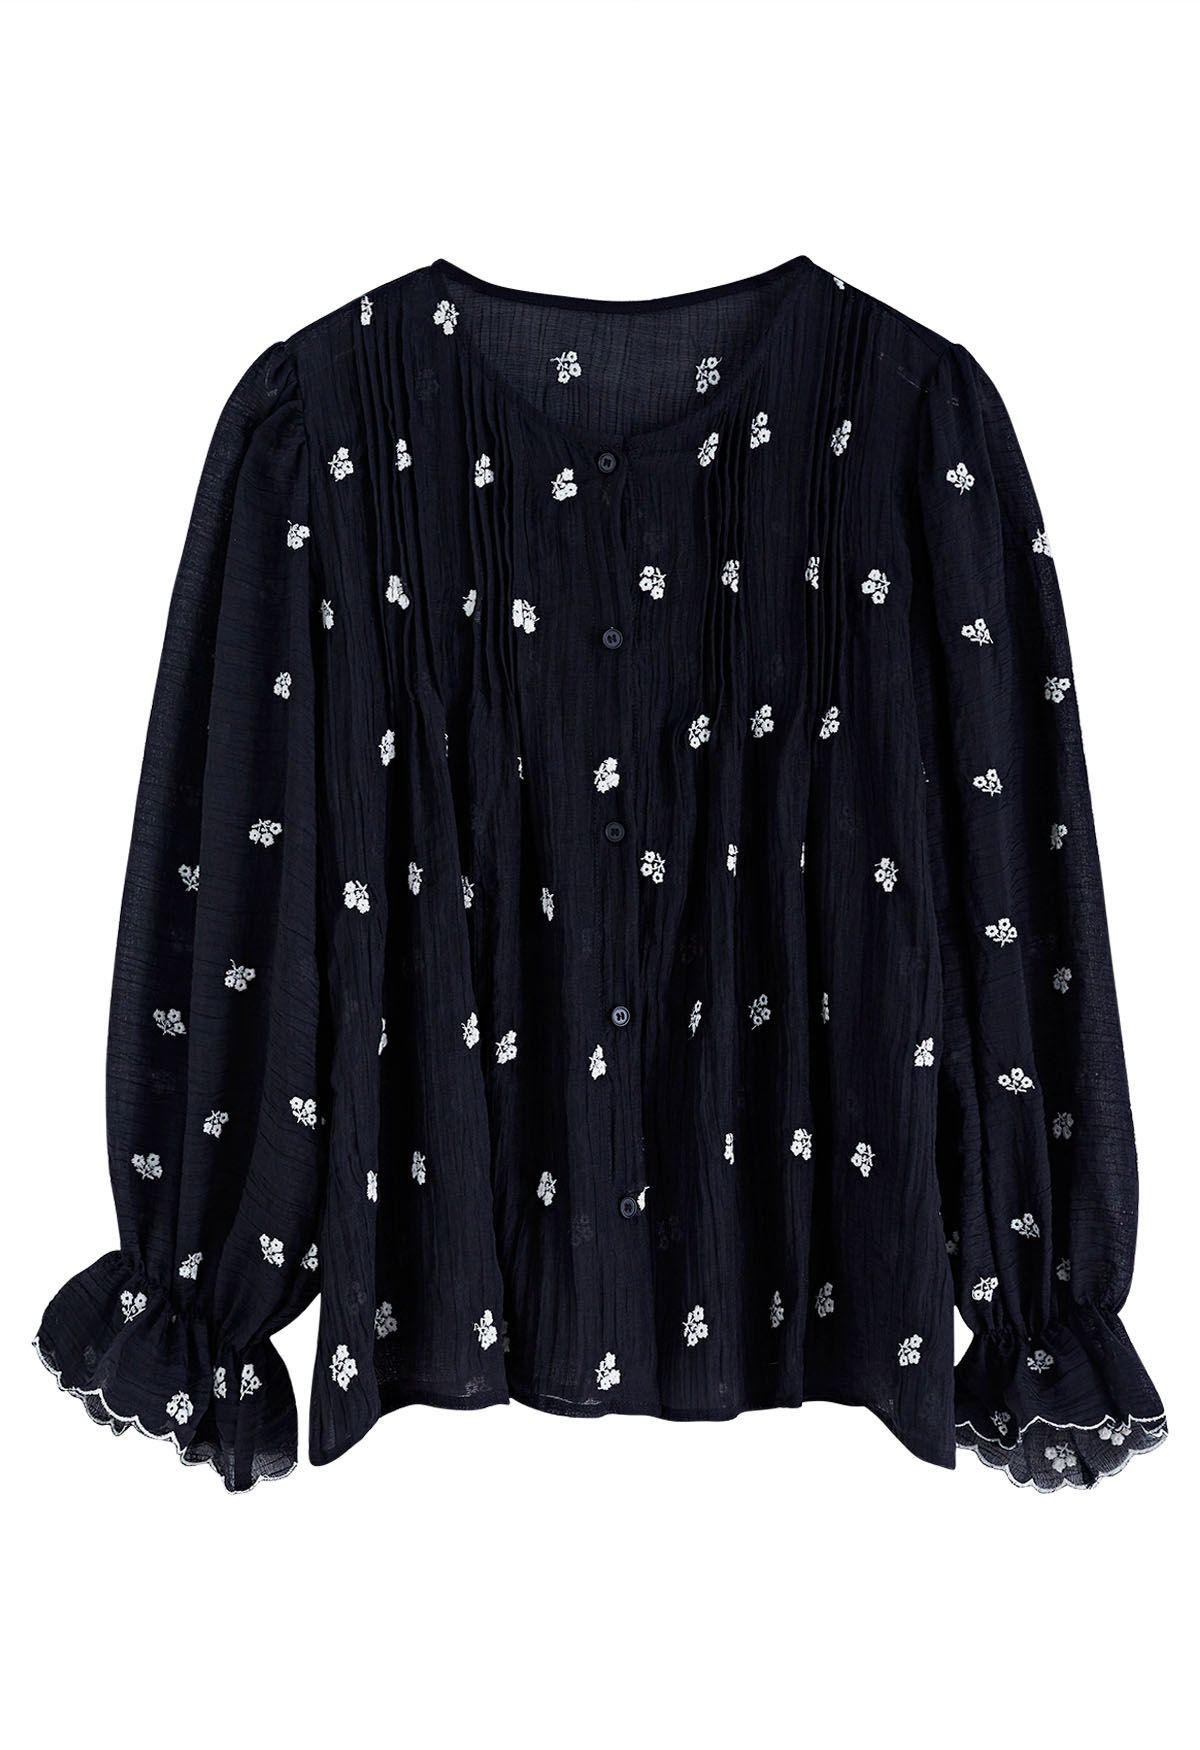 Embroidered Floret Pintuck Detail Dolly Top in Black